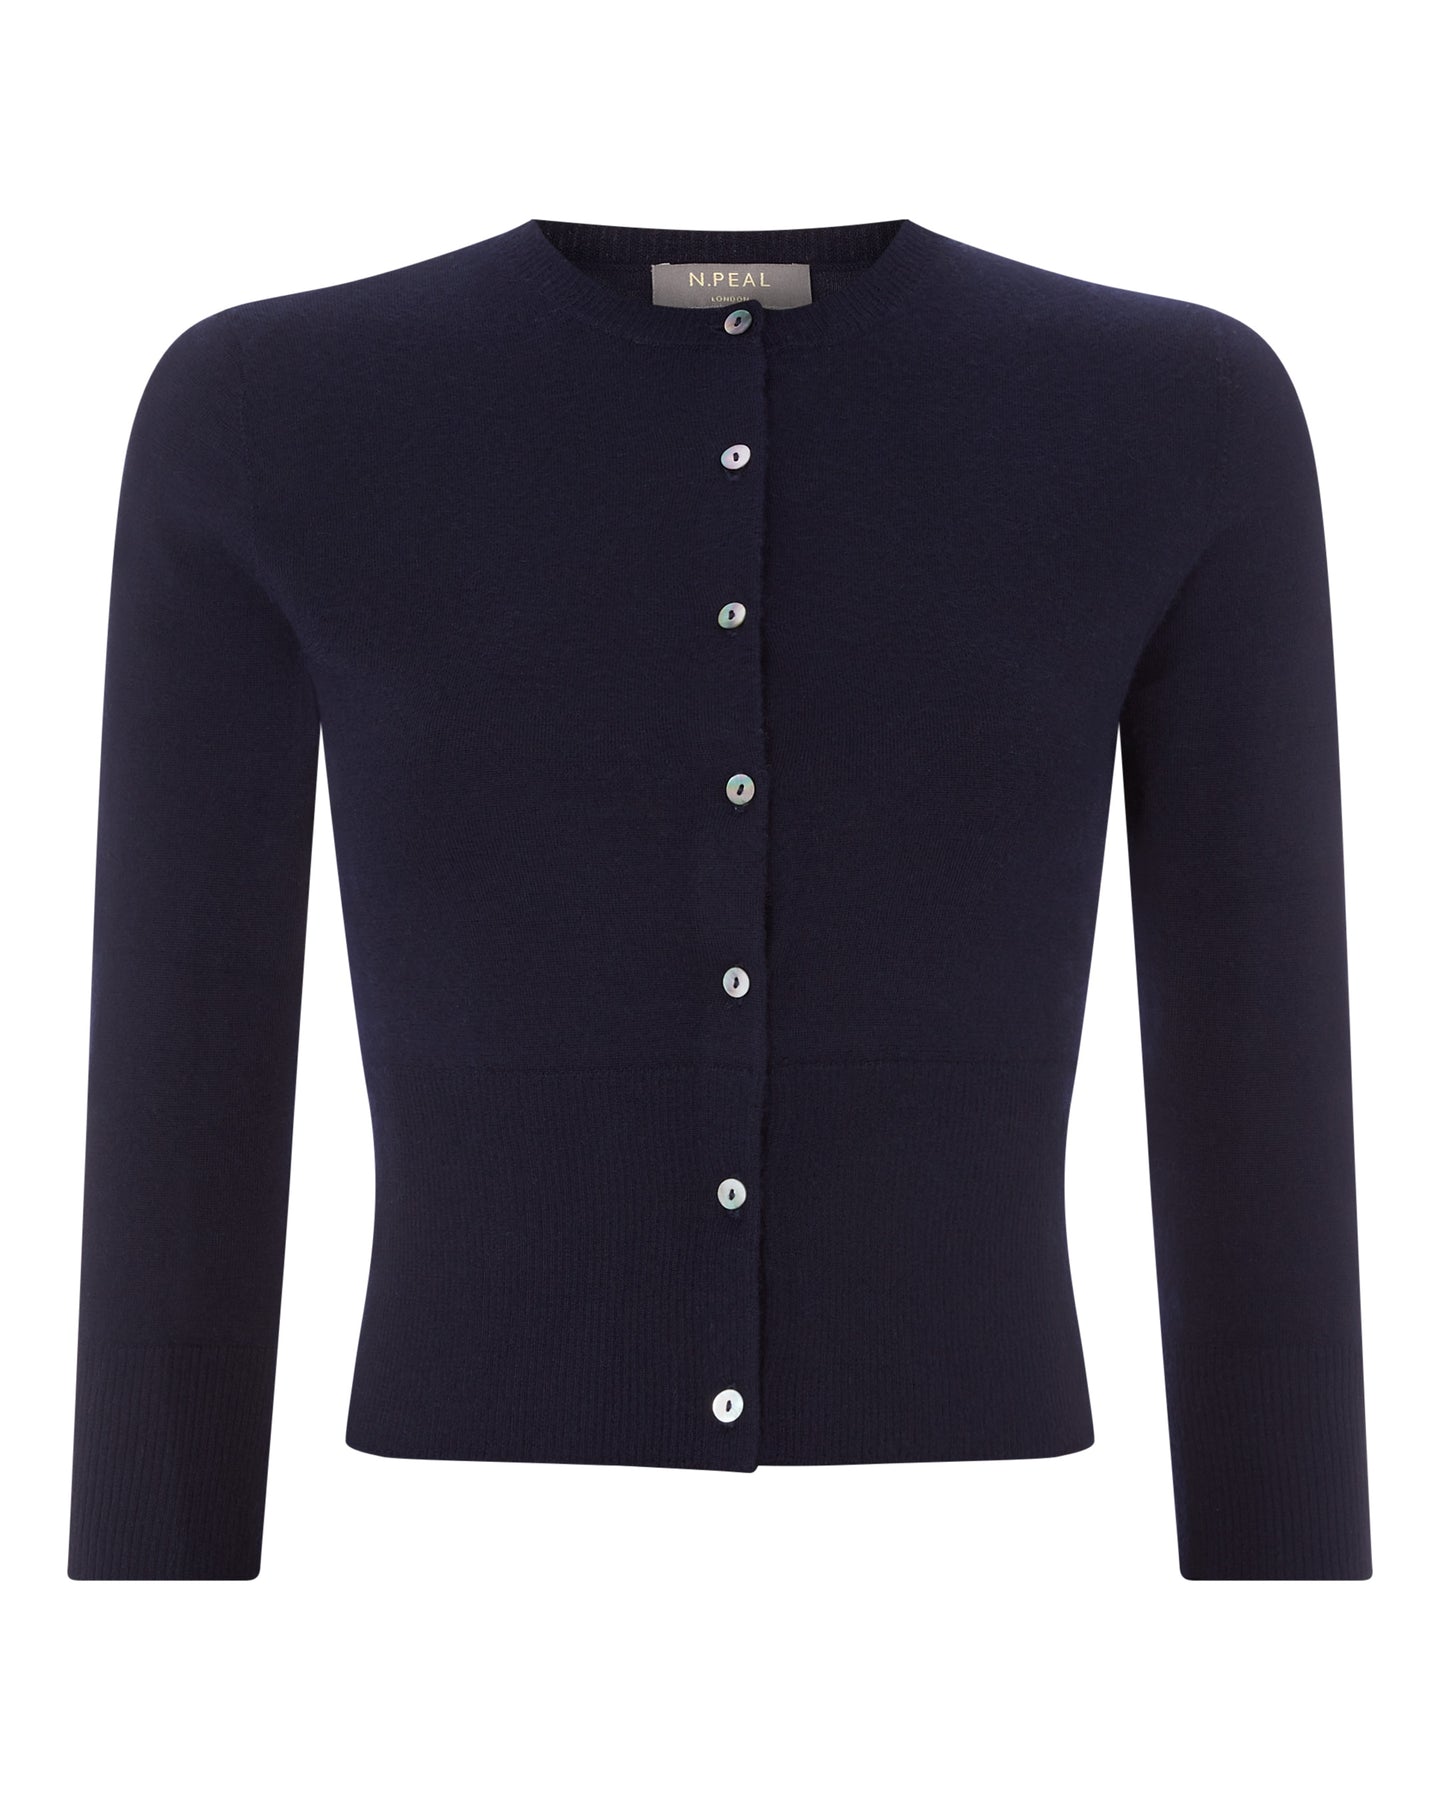 N.Peal Women's Superfine Cropped Cashmere Cardigan Navy Blue